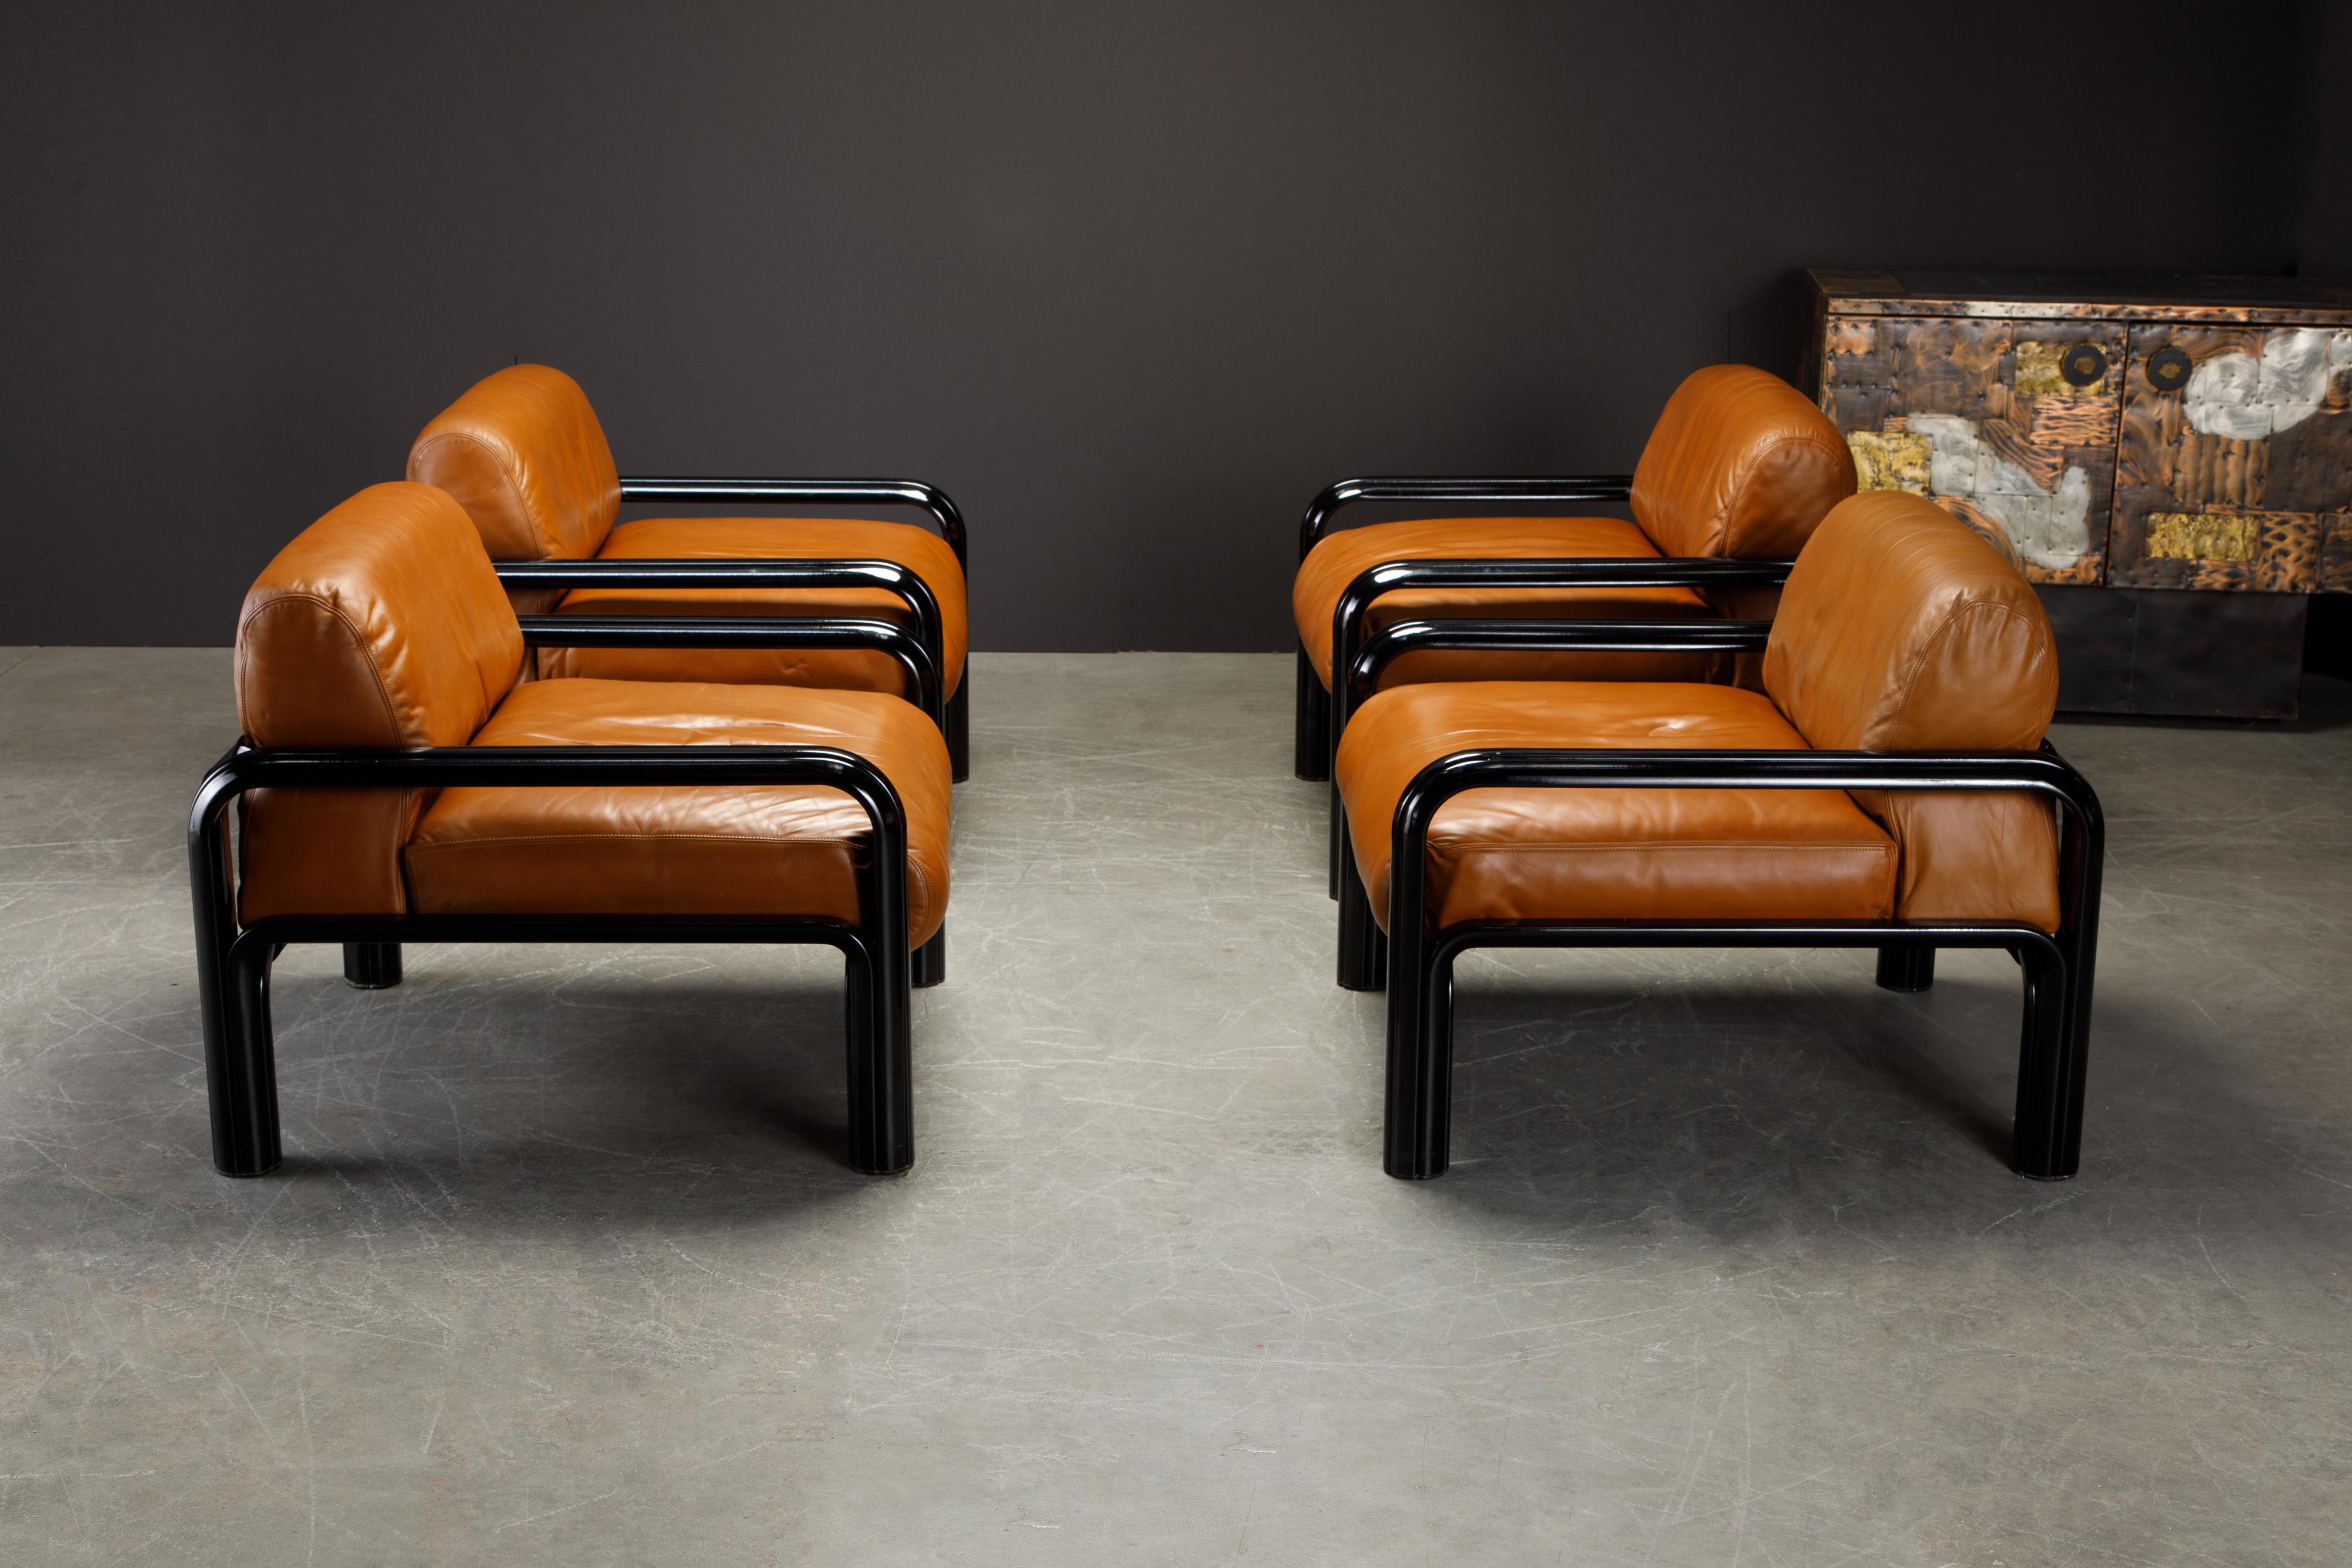 Lacquered Set of 4 Gae Aulenti Leather and Steel Lounge Chairs for Knoll, Signed 1980